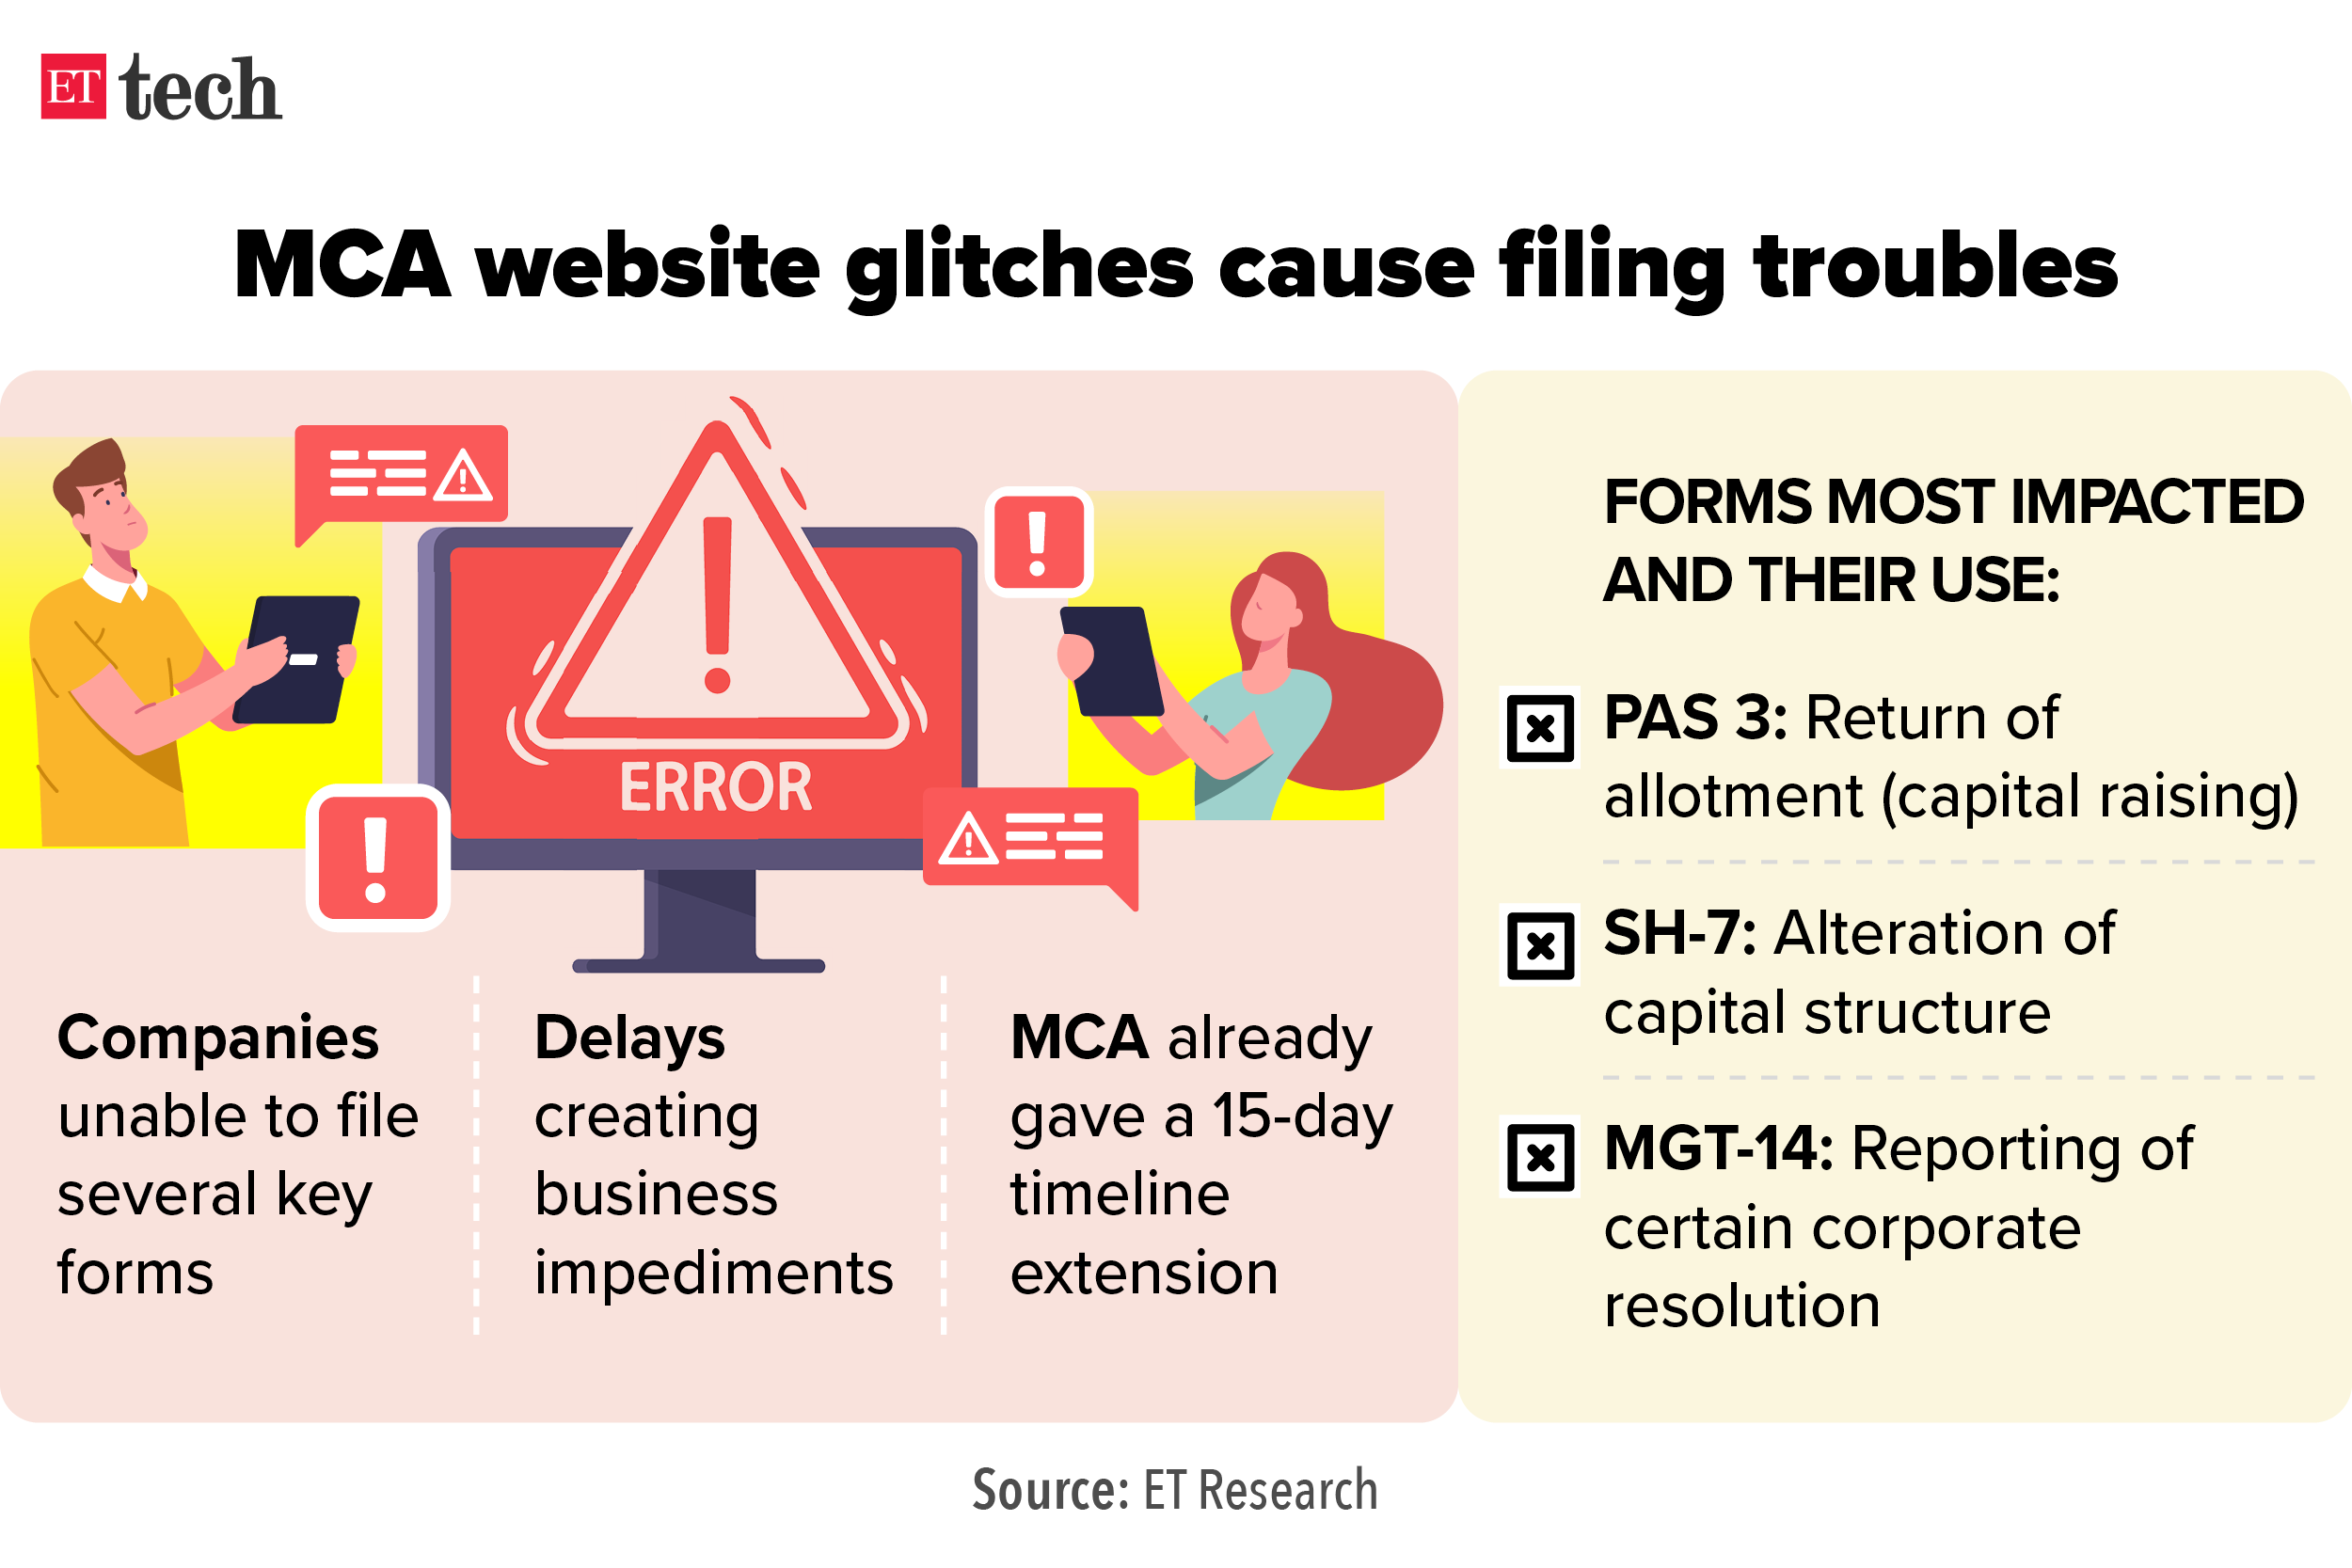 MCA website glitches cause filing troubles_Graphic_ETTECH